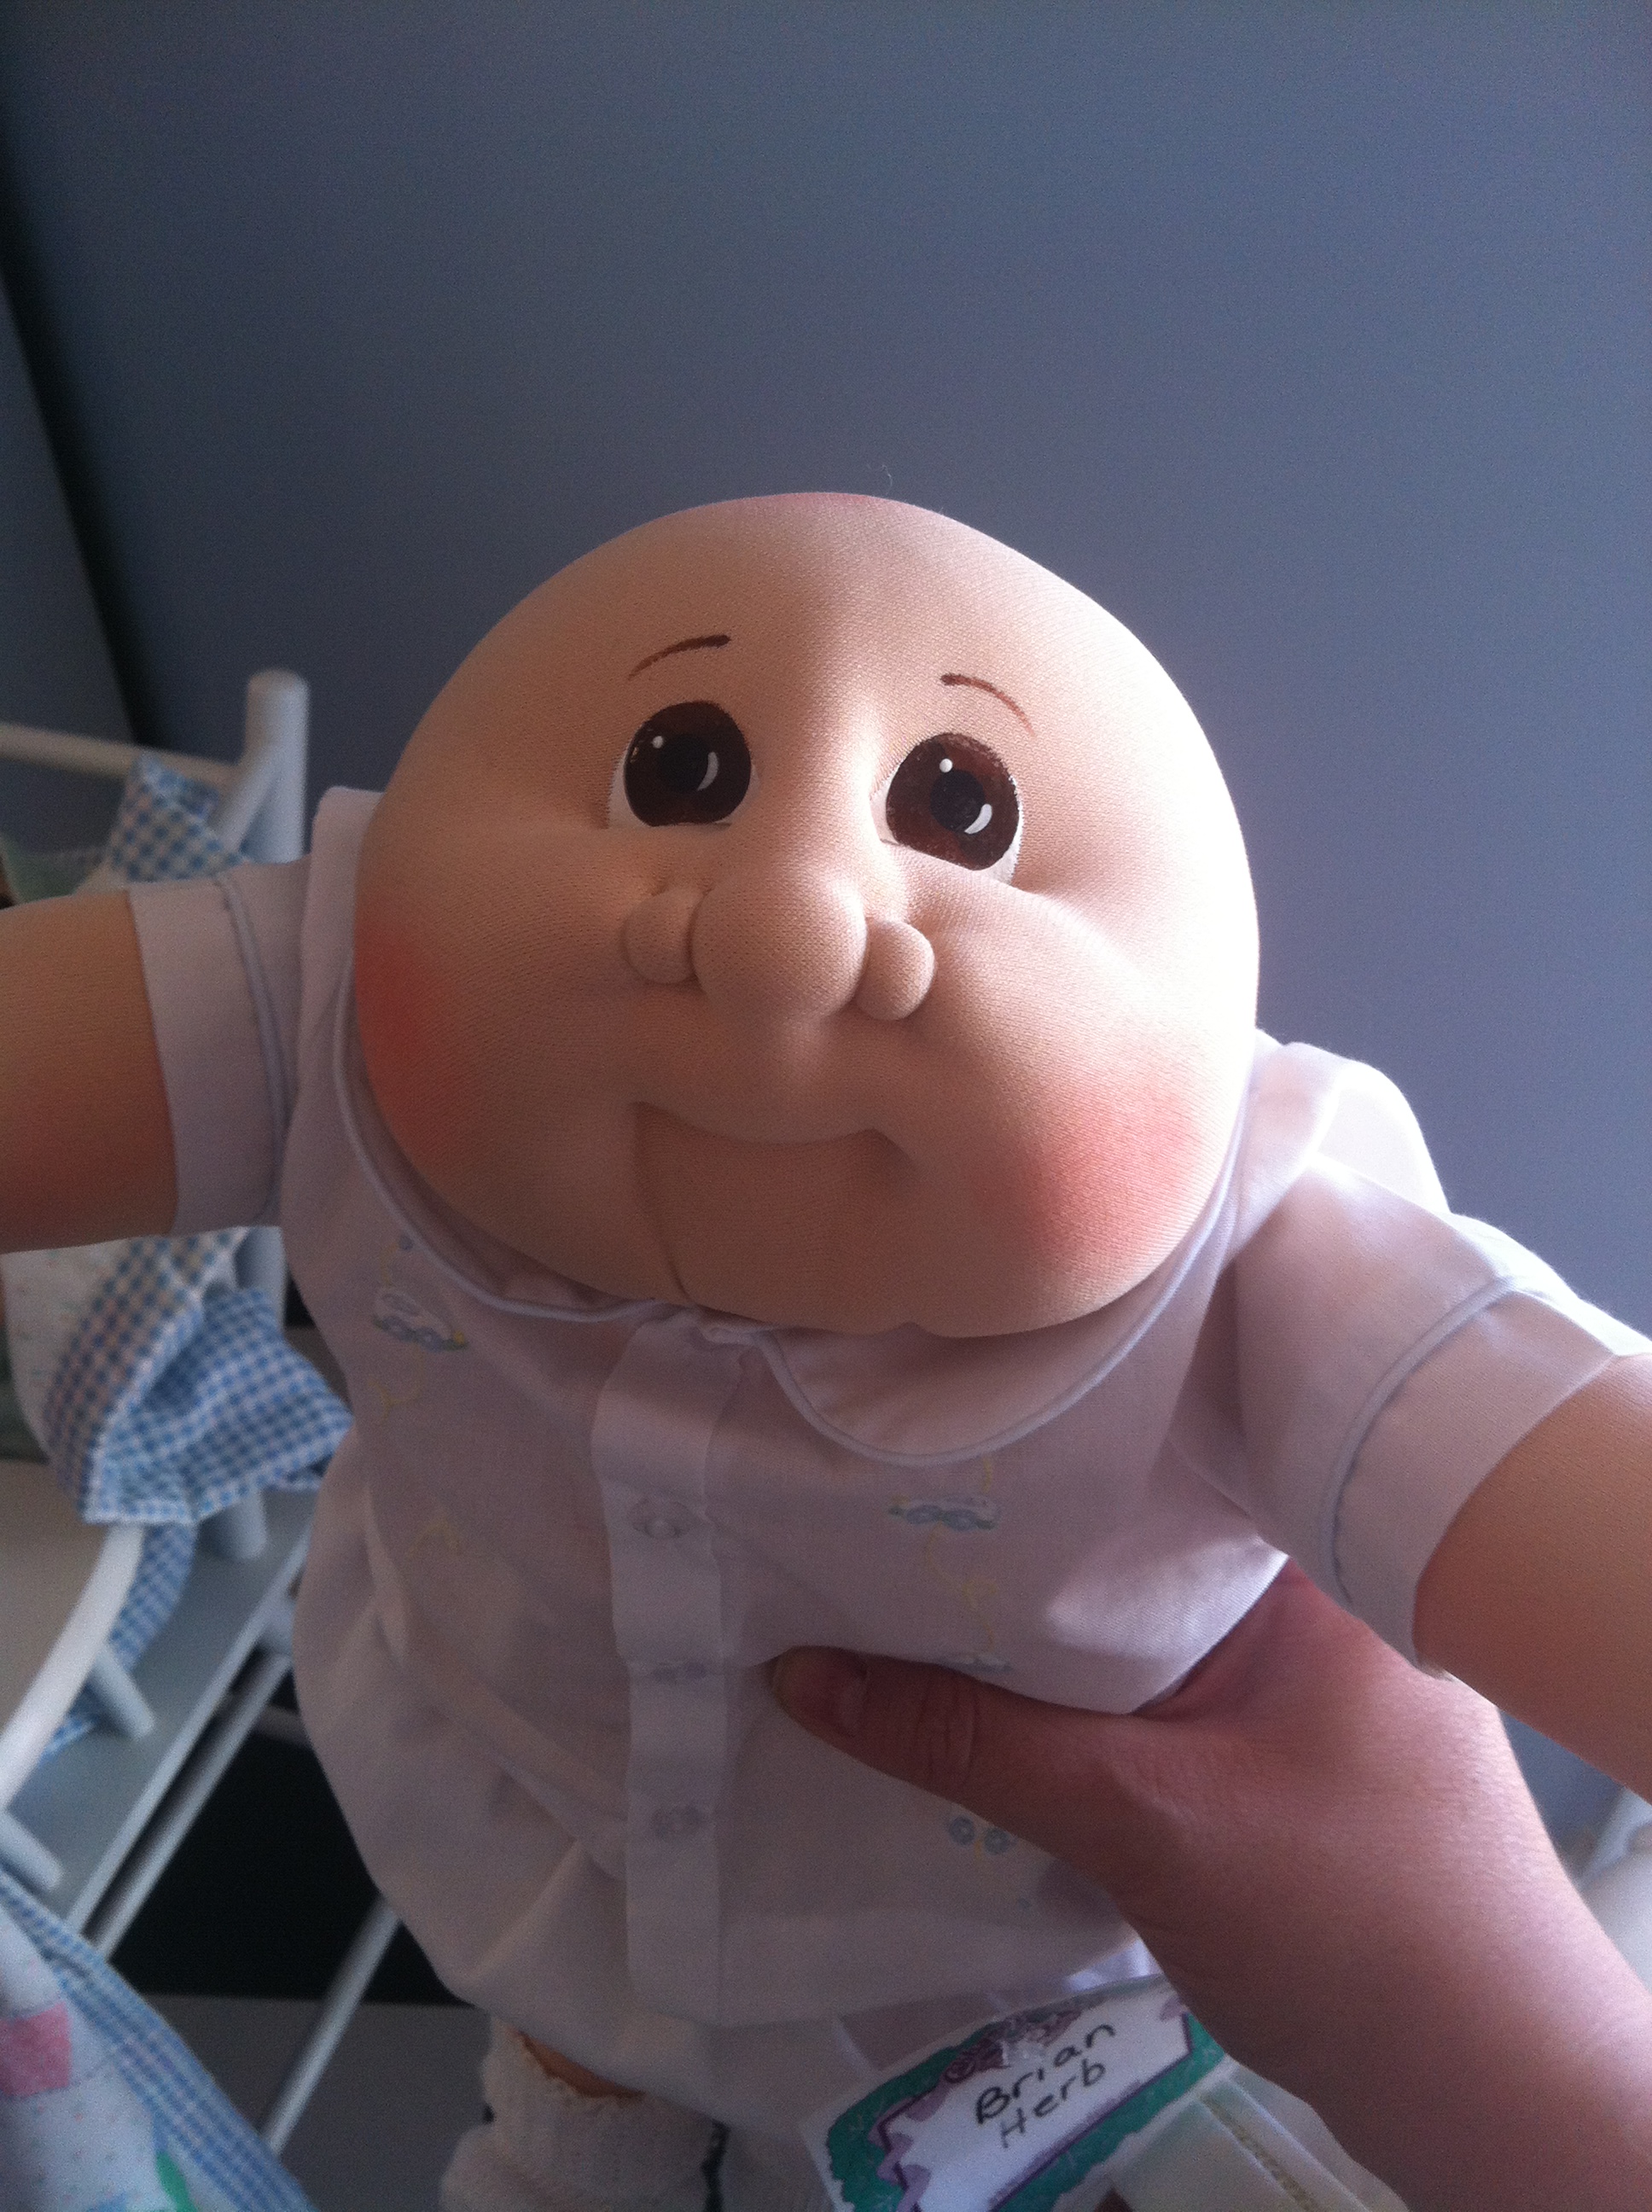 Company Who Makes Cabbage Patch Dolls